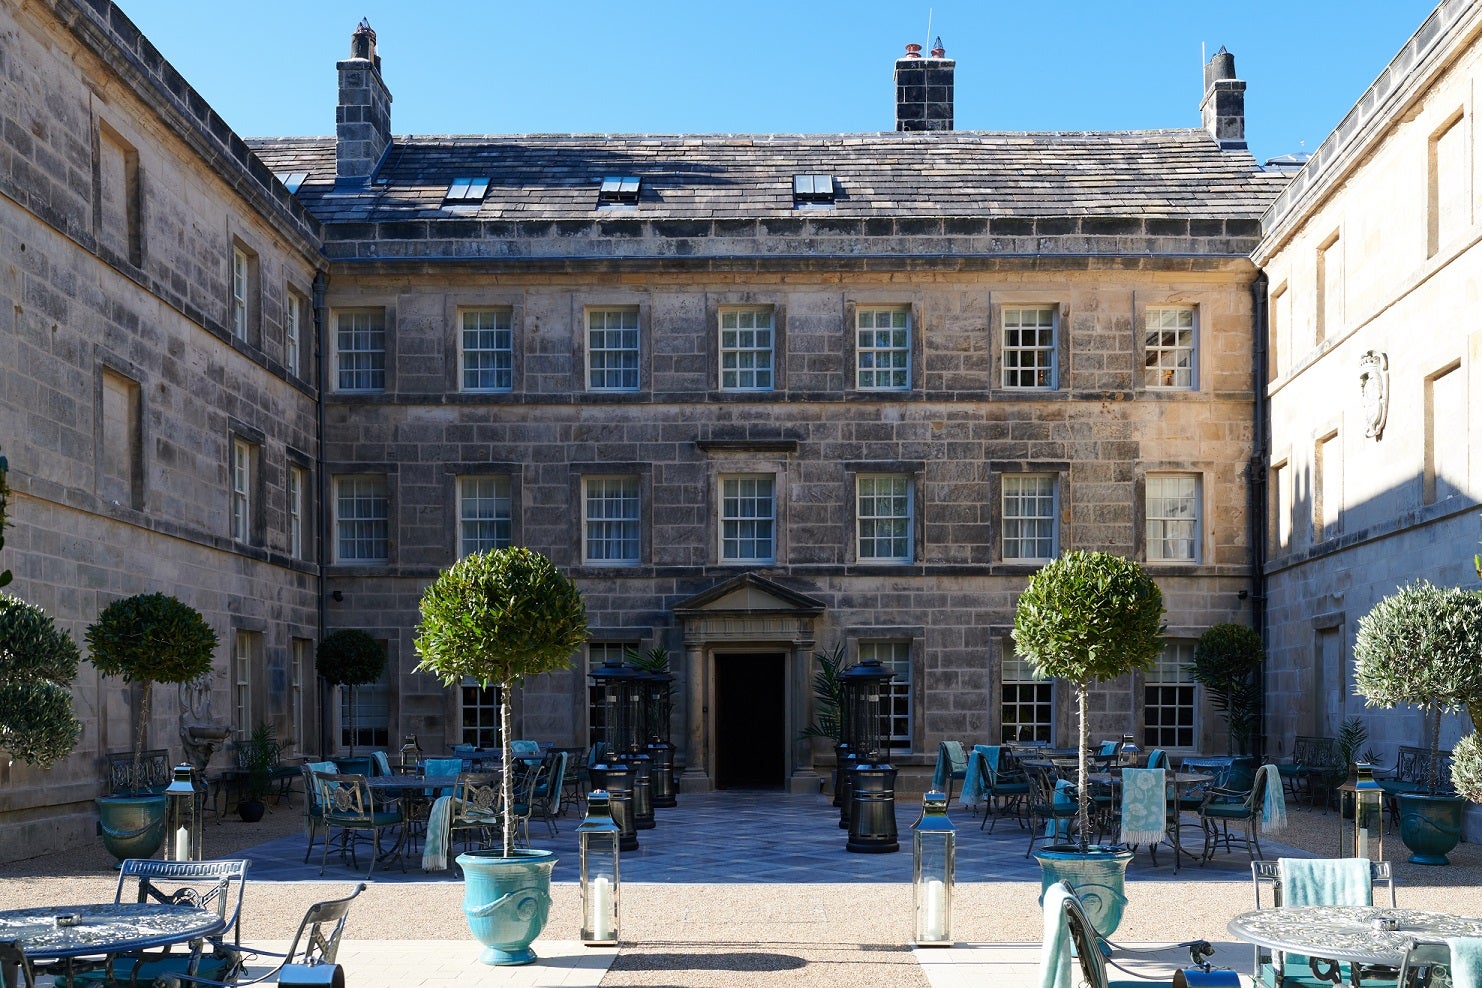 The Norton Courtyard at Grantley Hall feels like a step back in time